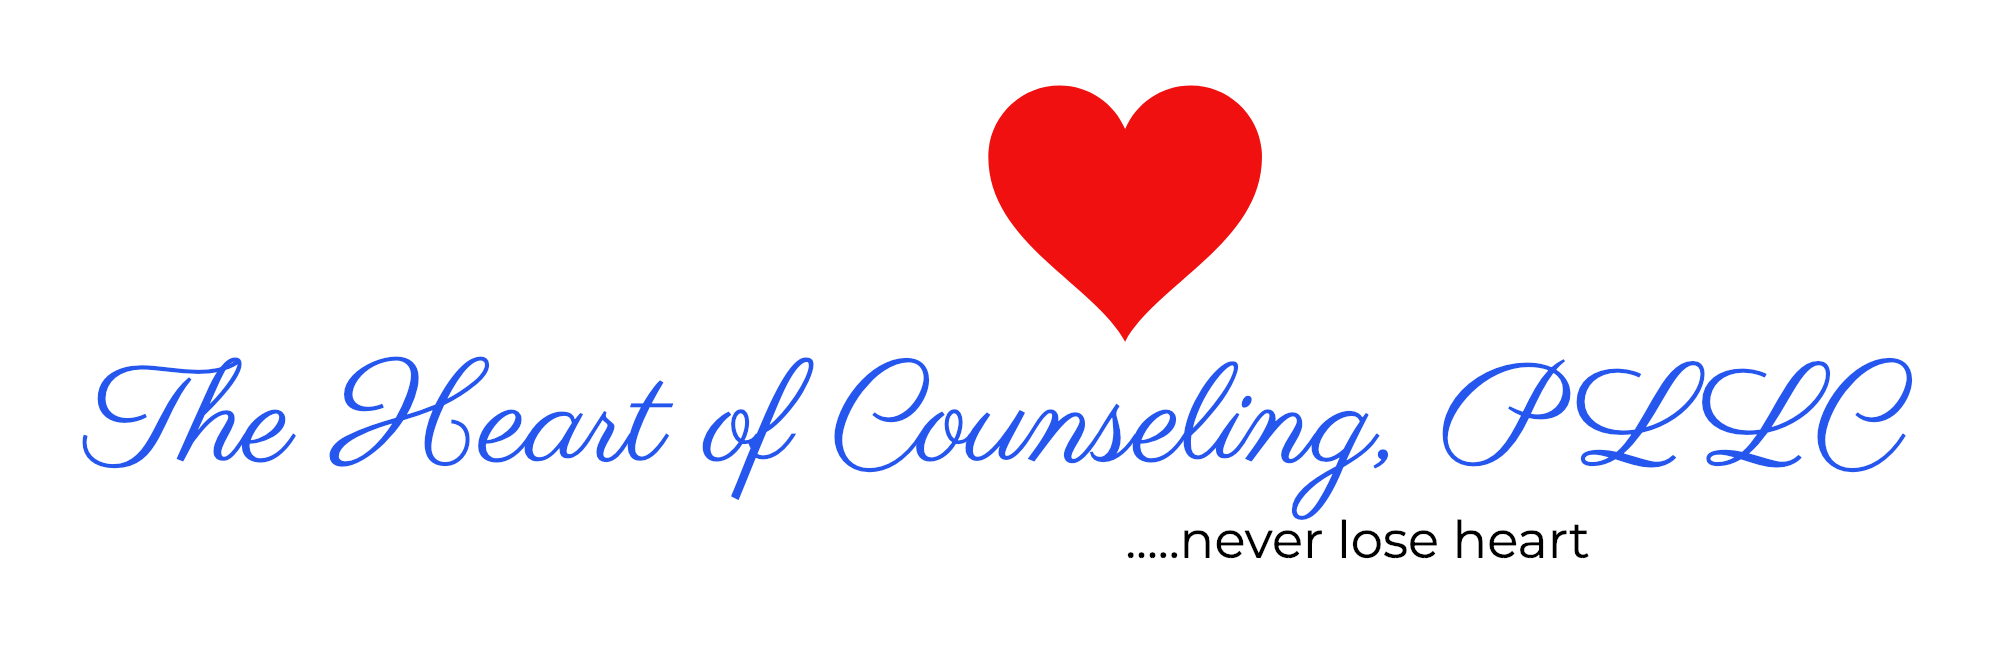 The Heart of Counseling, PLLC